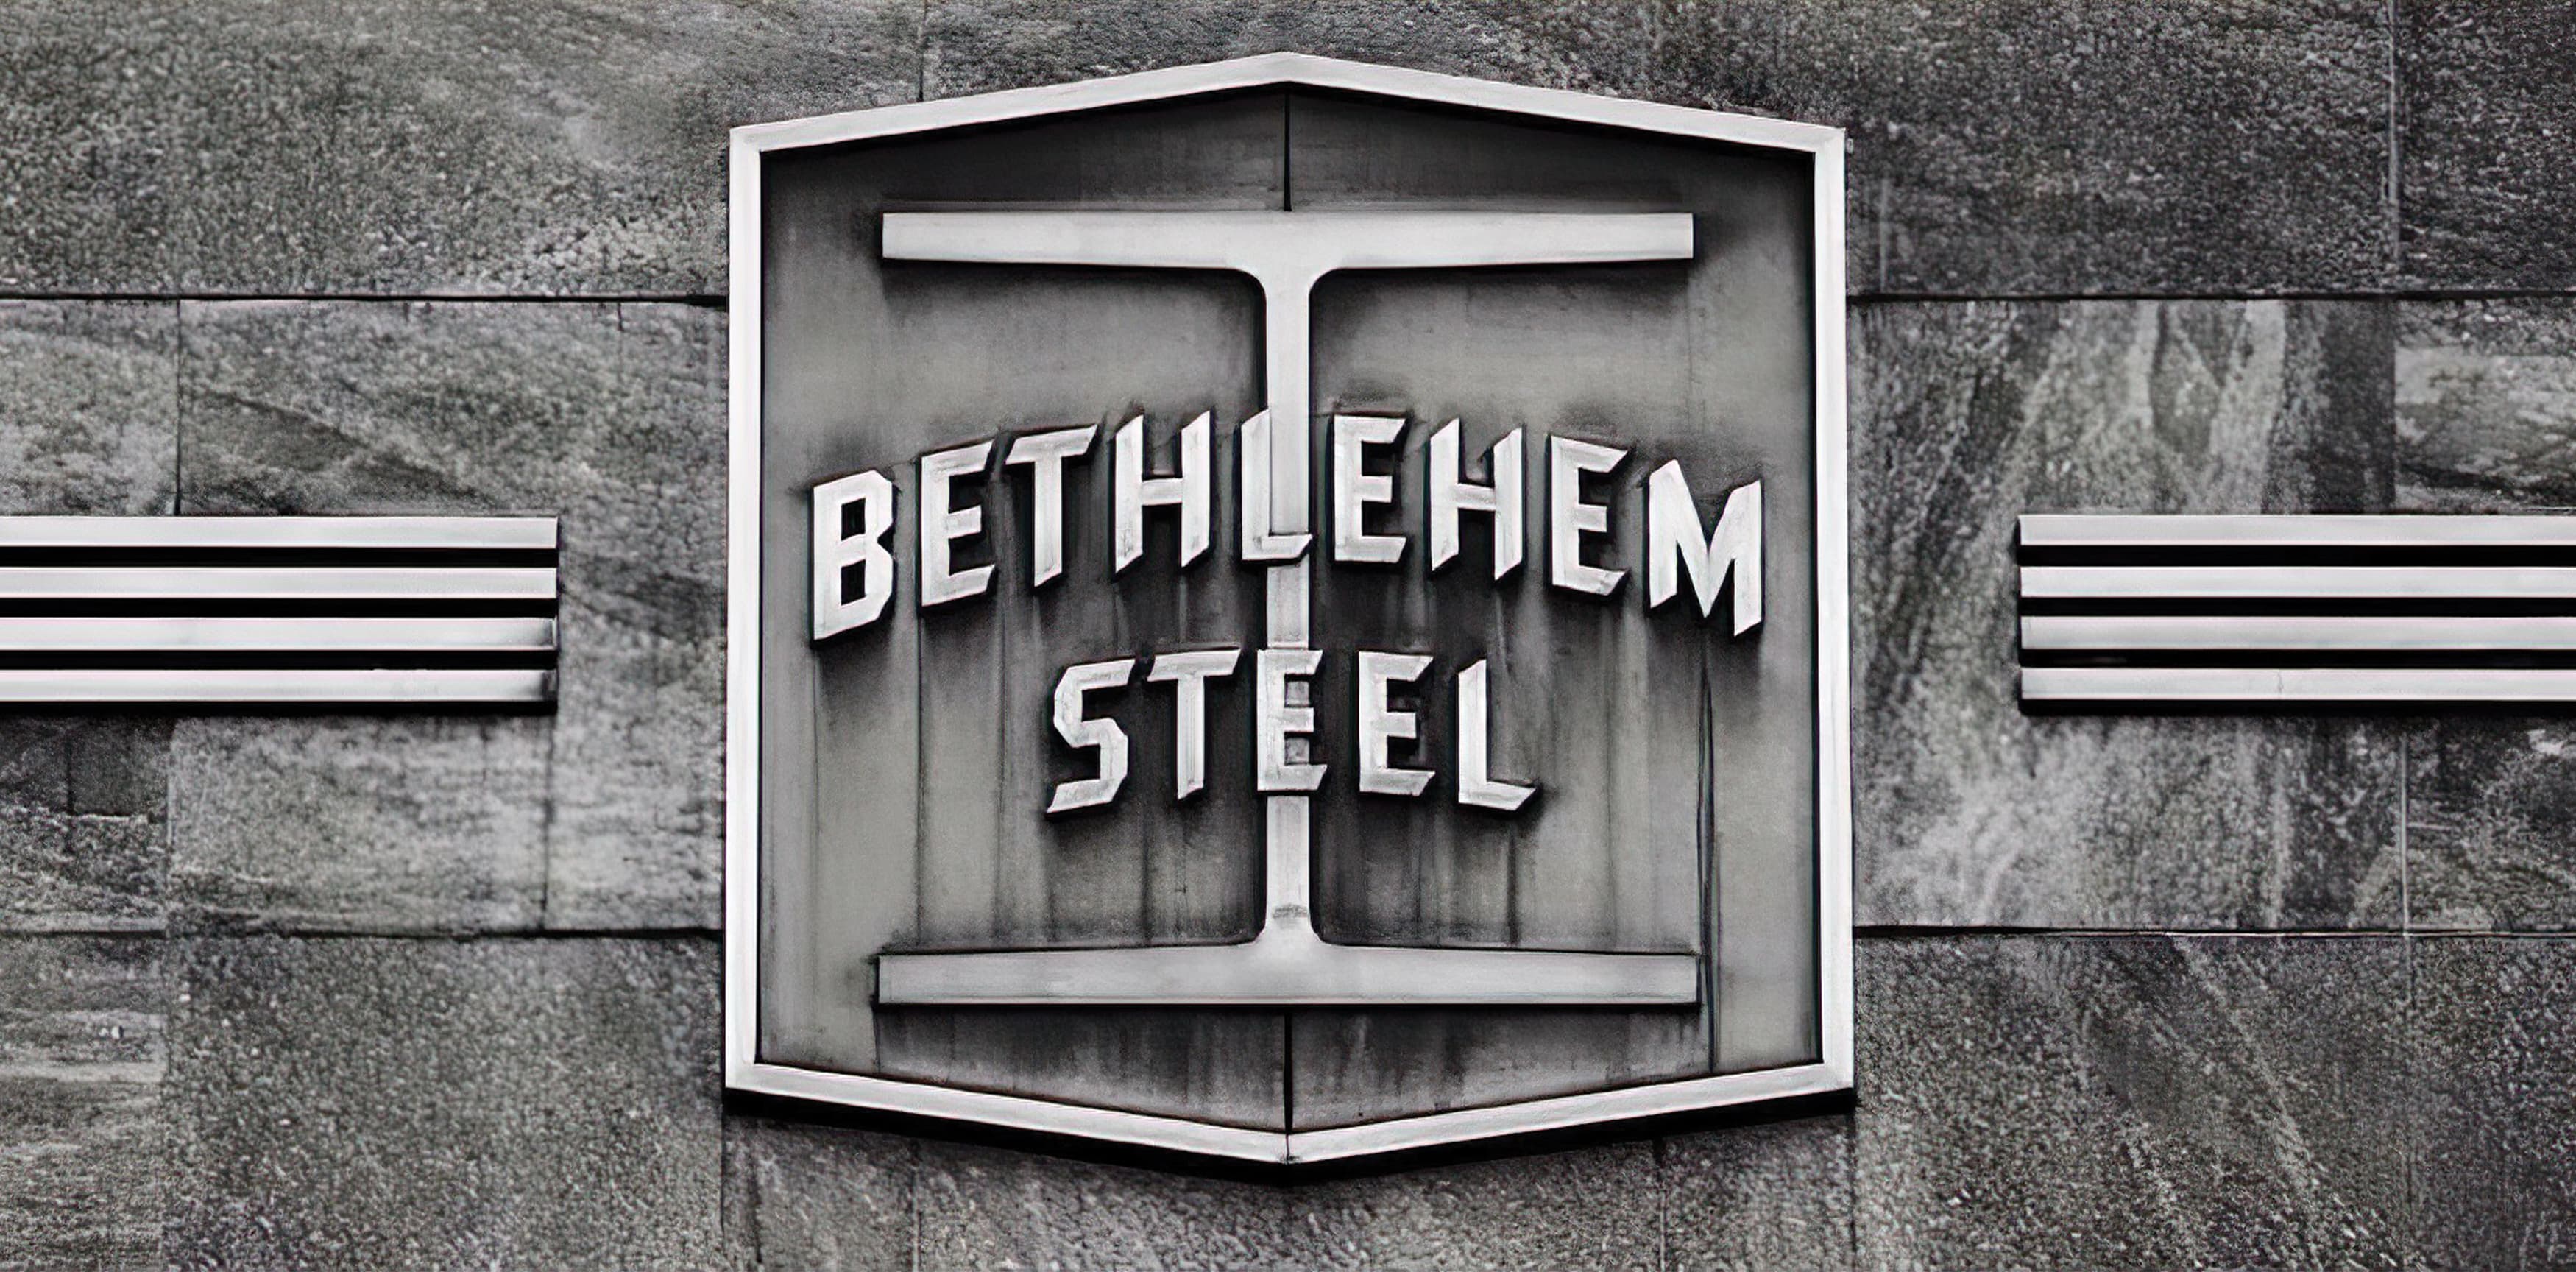 A Bethlehem Steel icon hearkening back to the history of the site for the Sands Casino Resort in Bethlehem, PA.